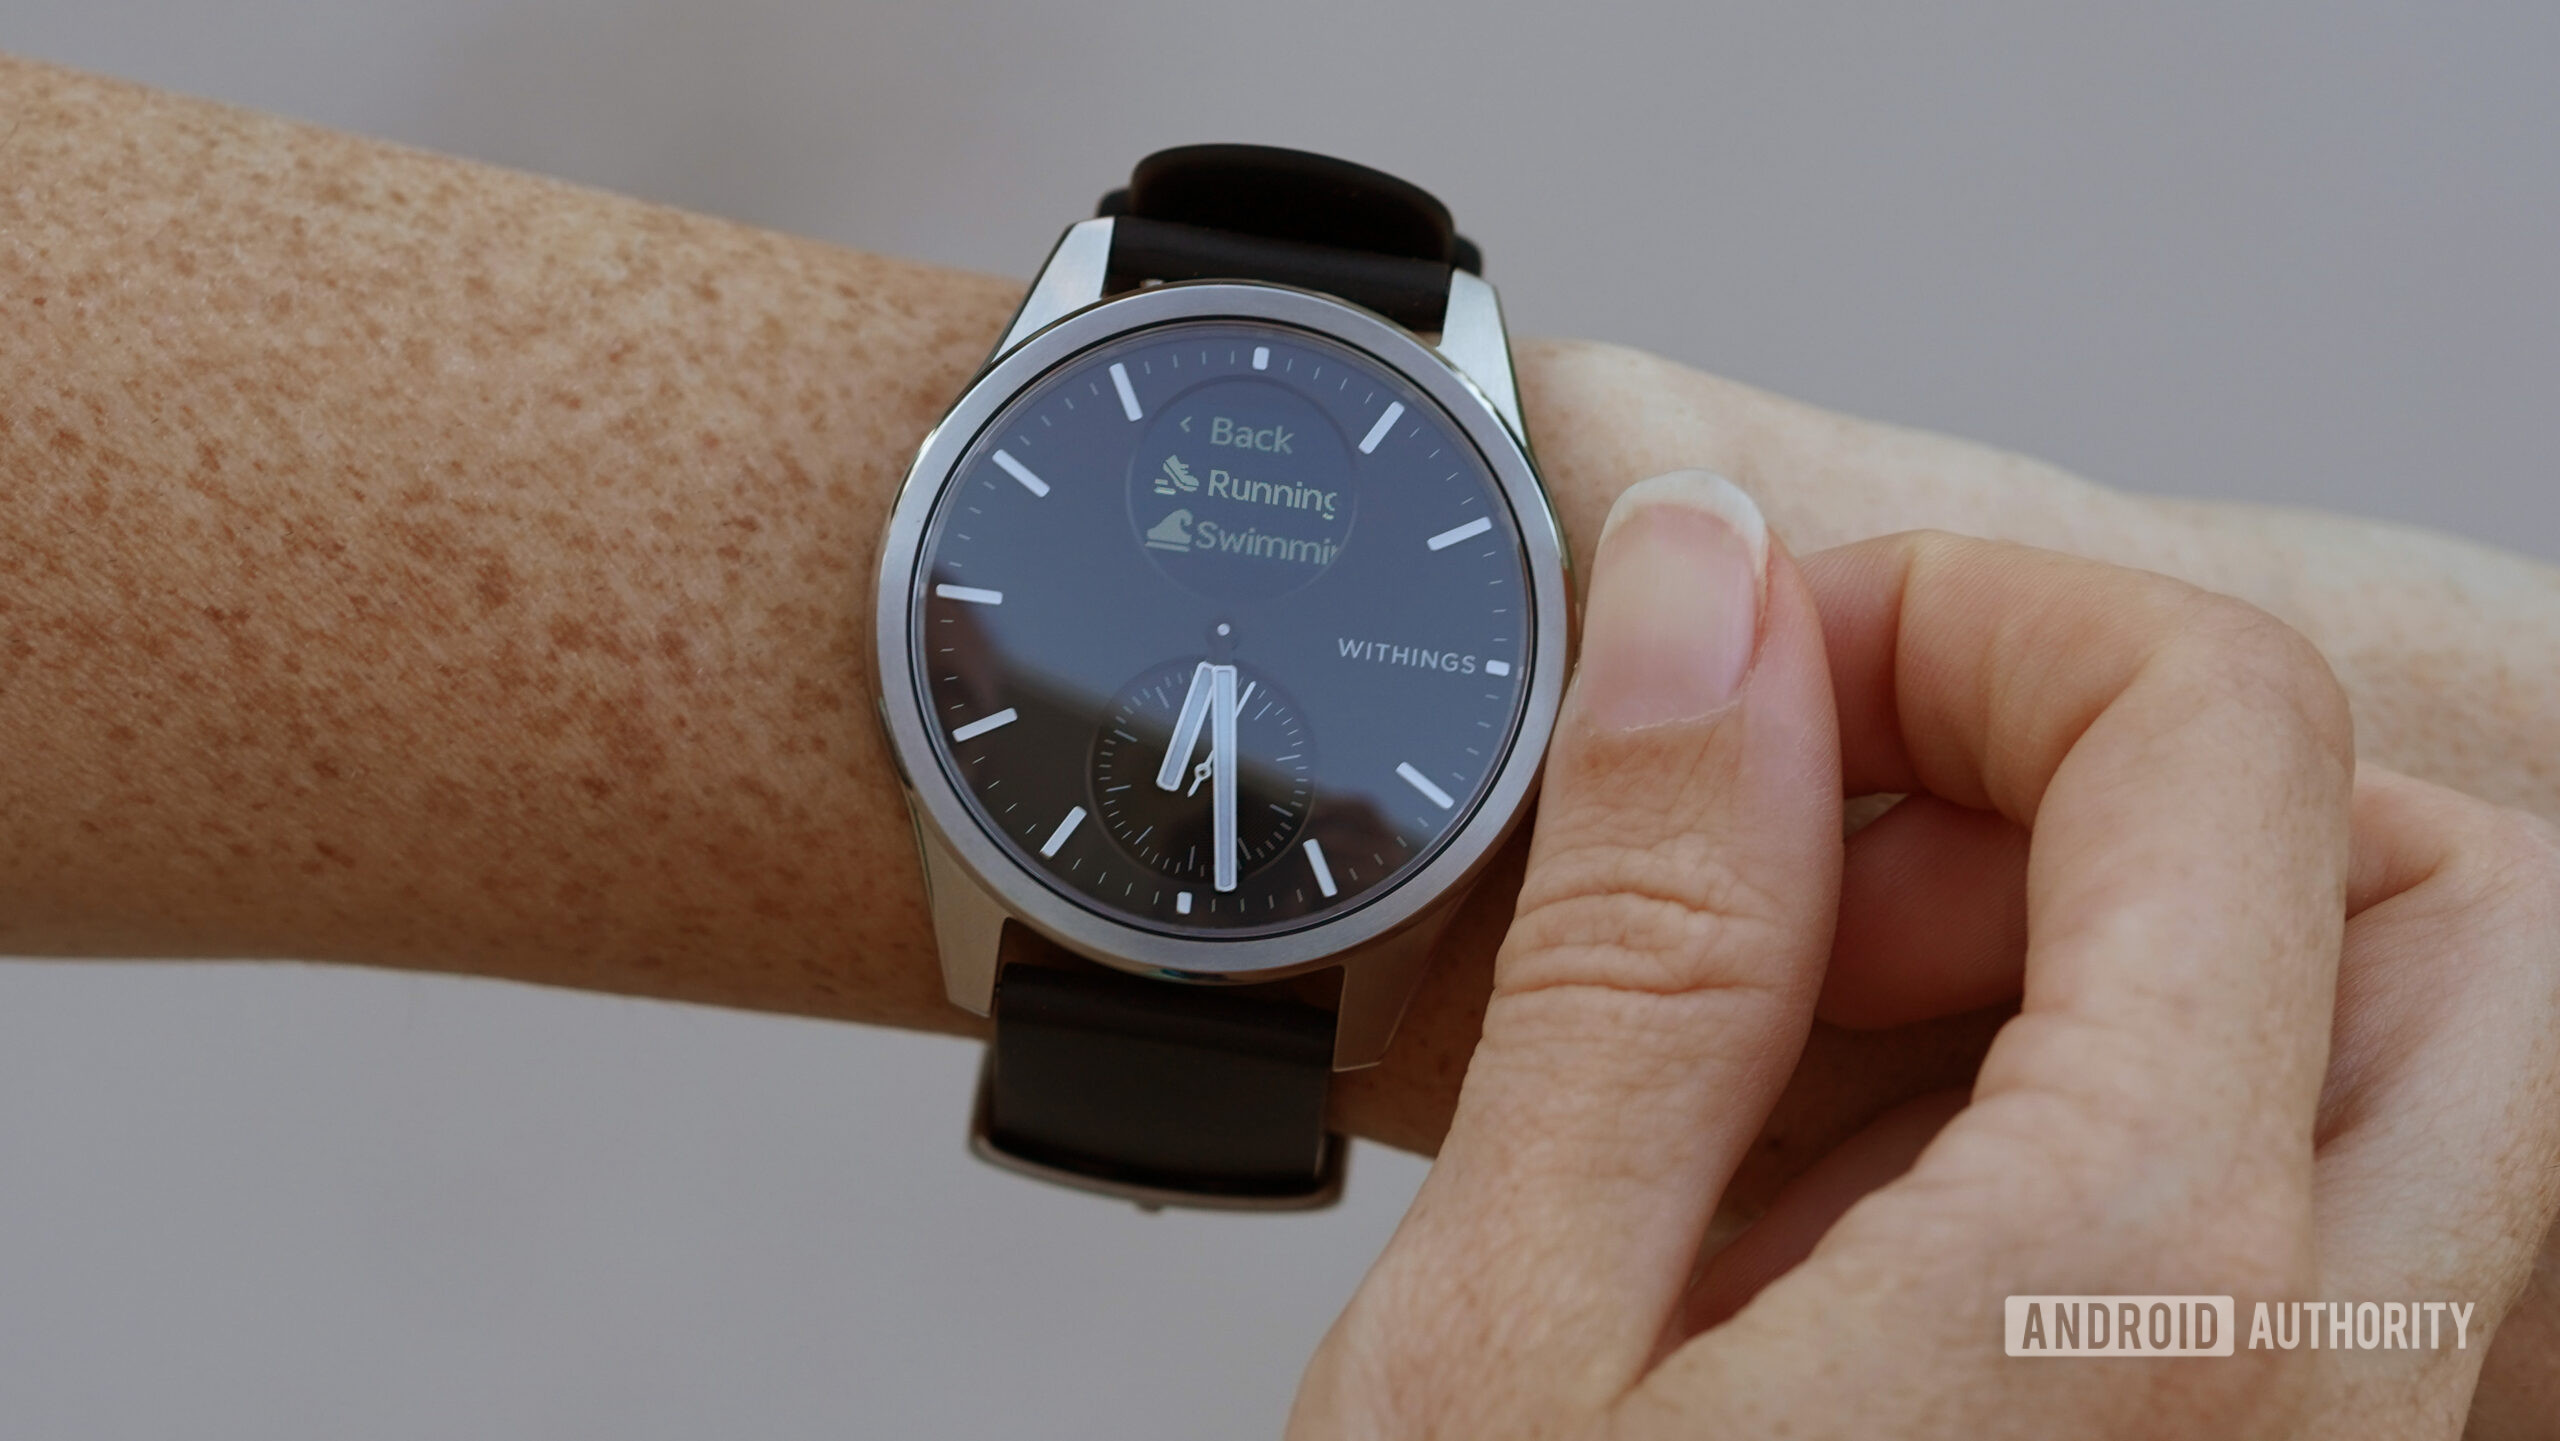 A user reviews the workout options on their Withings ScanWatch 2.